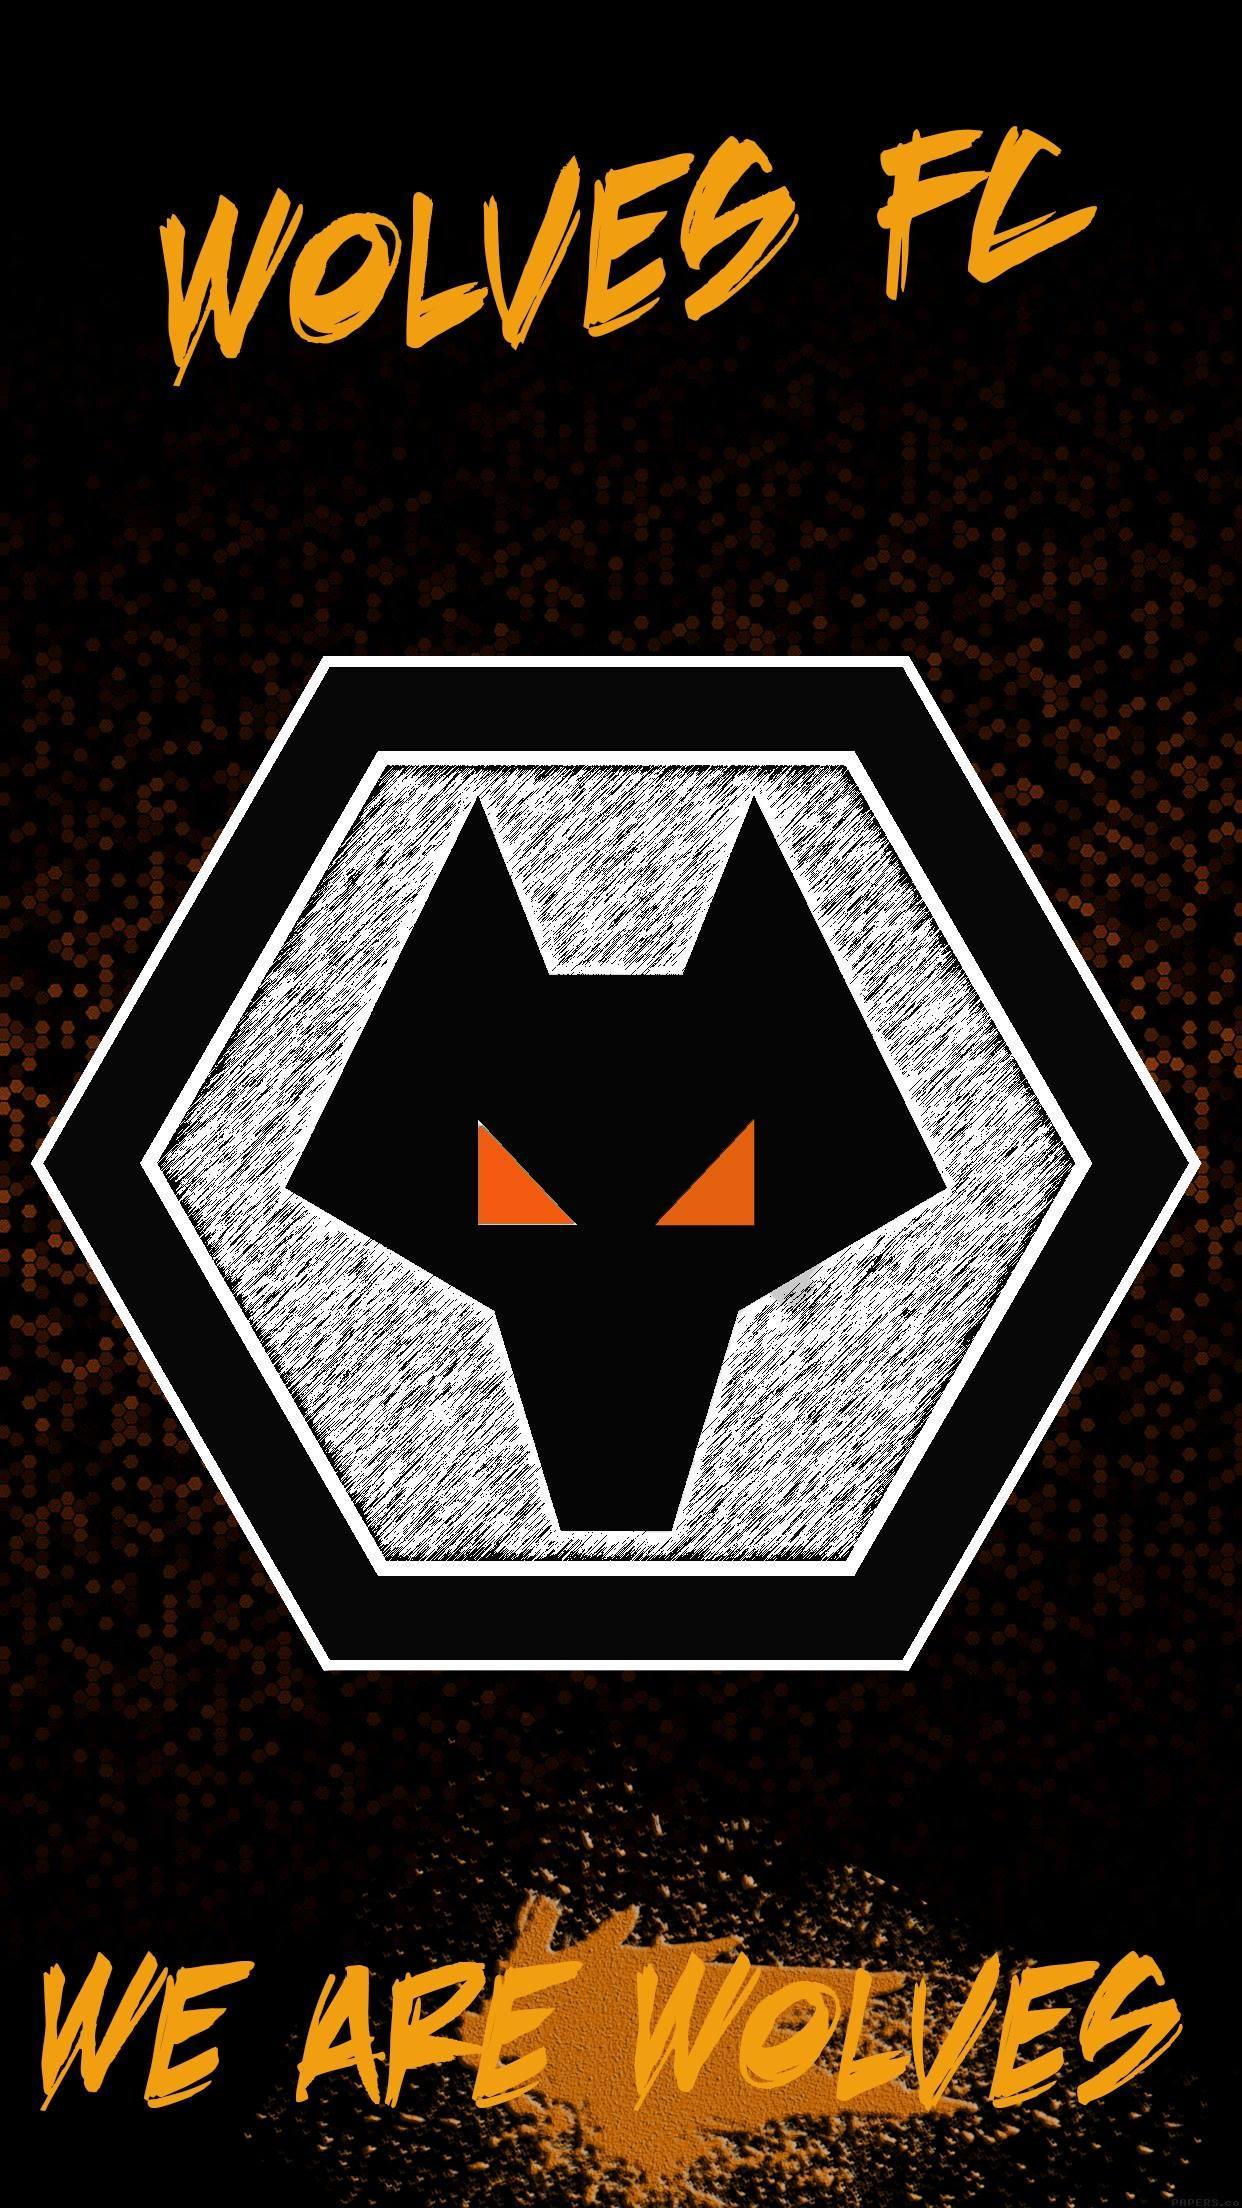 Beautiful Wolves Fc Wallpaper Players Images